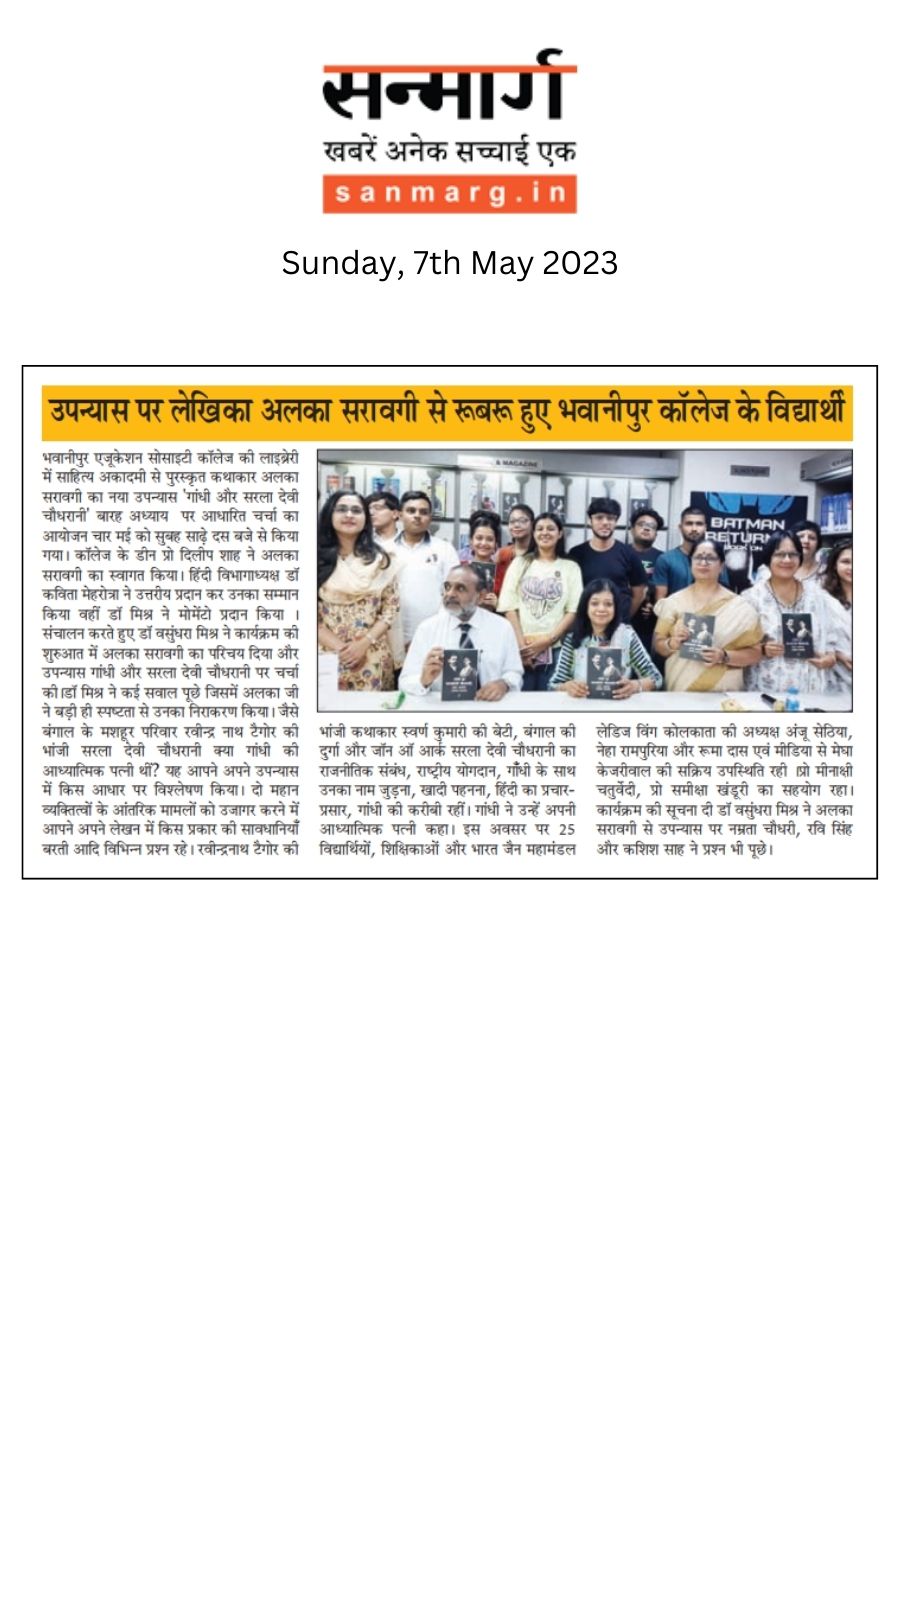 Sanmarg Coverage of the event Conversation with Indian Novelist - Alka Saraogi on "Gandhi Aur Sarala devi Chaudhrani :Barah Adhyay" held on campus on 4th May 2023
